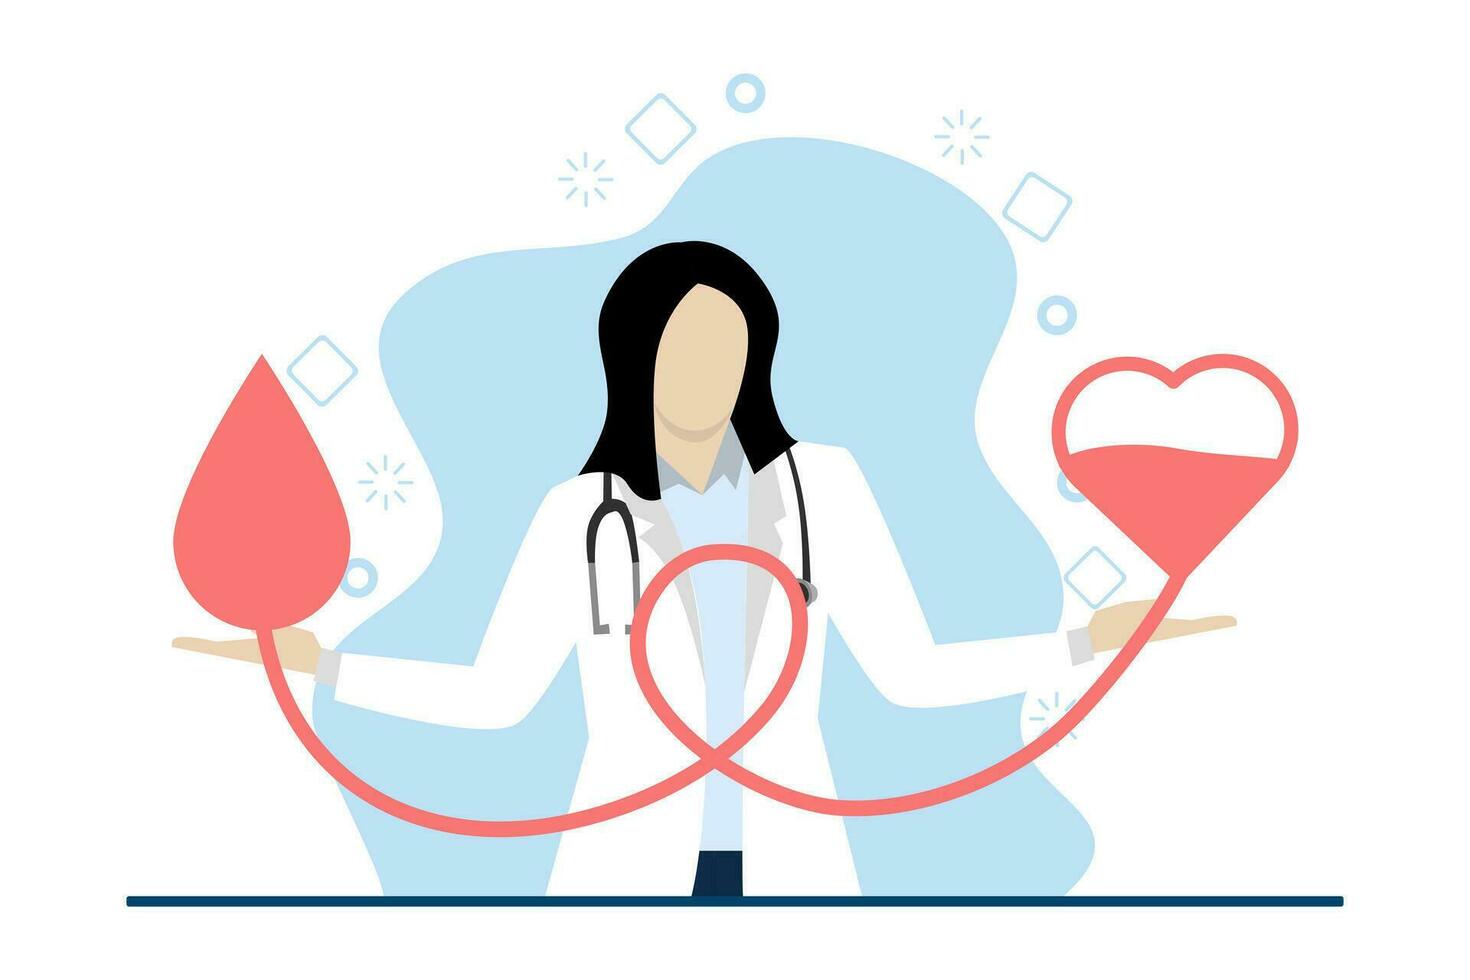 Concept of world blood donor day, blood donation, blood assistance for those in need, doctor with hand holding a drop of blood to put into a heart shaped container. vector design illustration.